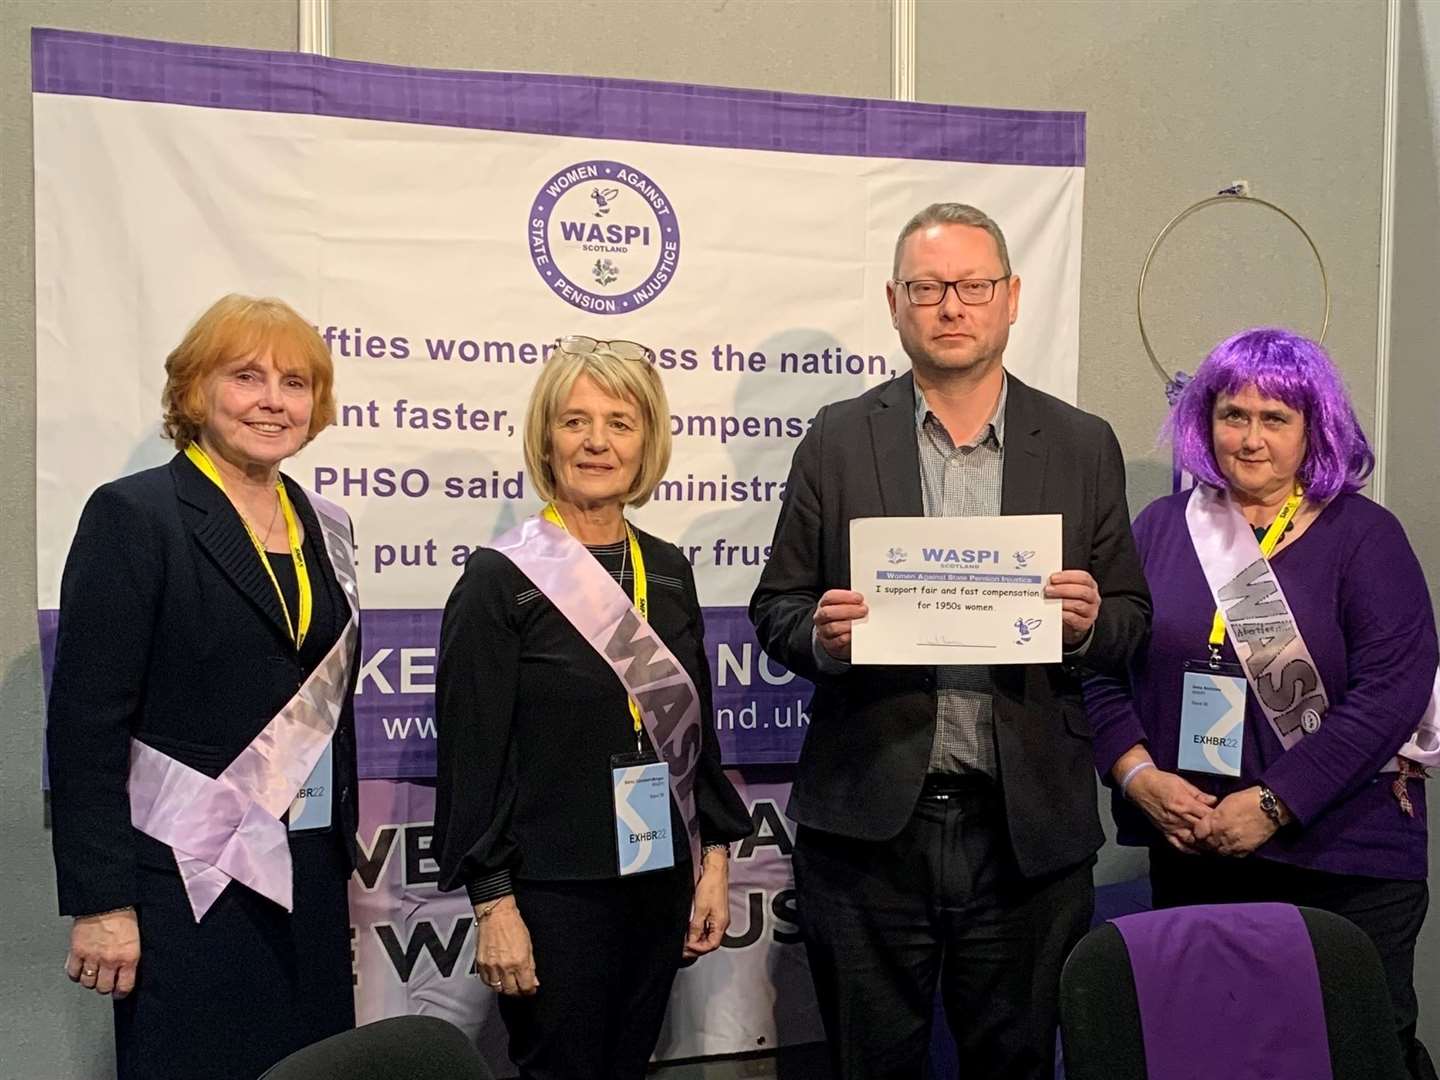 Richard Thomson MP with campaigners at a previous WASPI meeting at Westminster